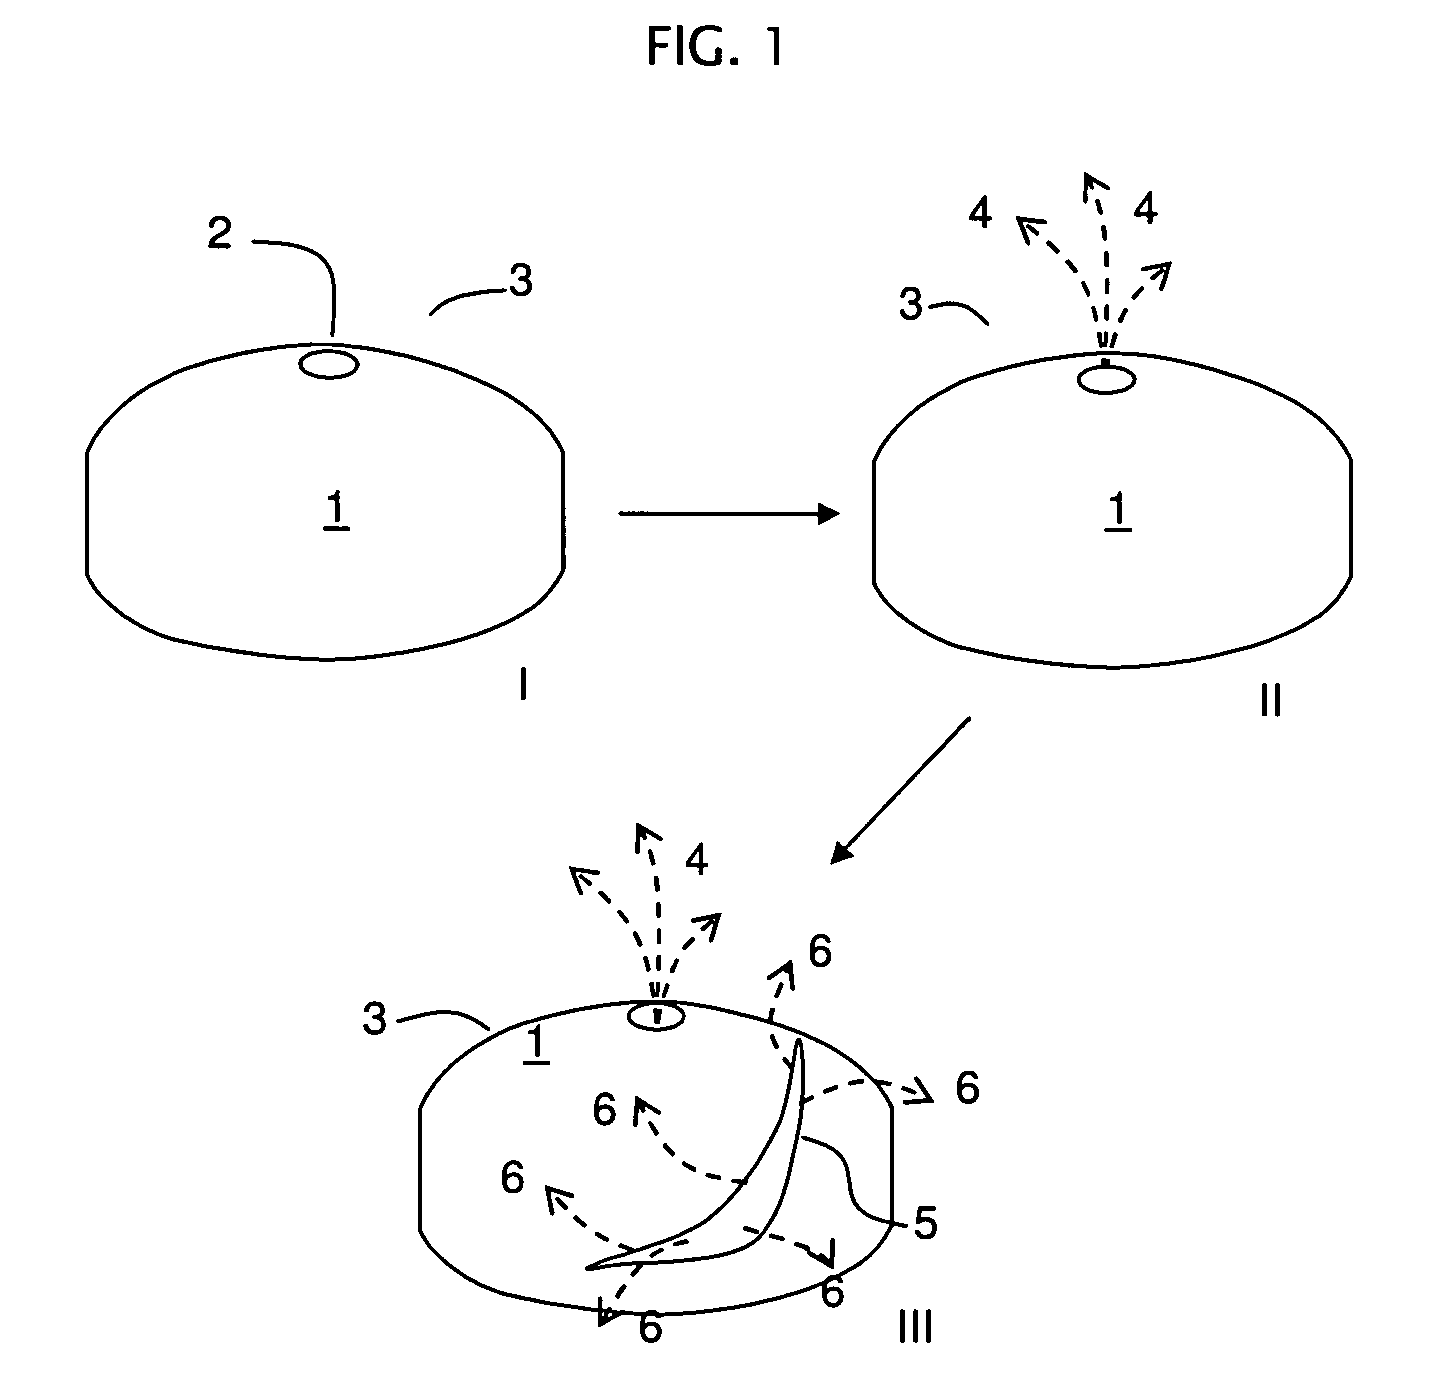 Rupturing controlled release device comprising a subcoat